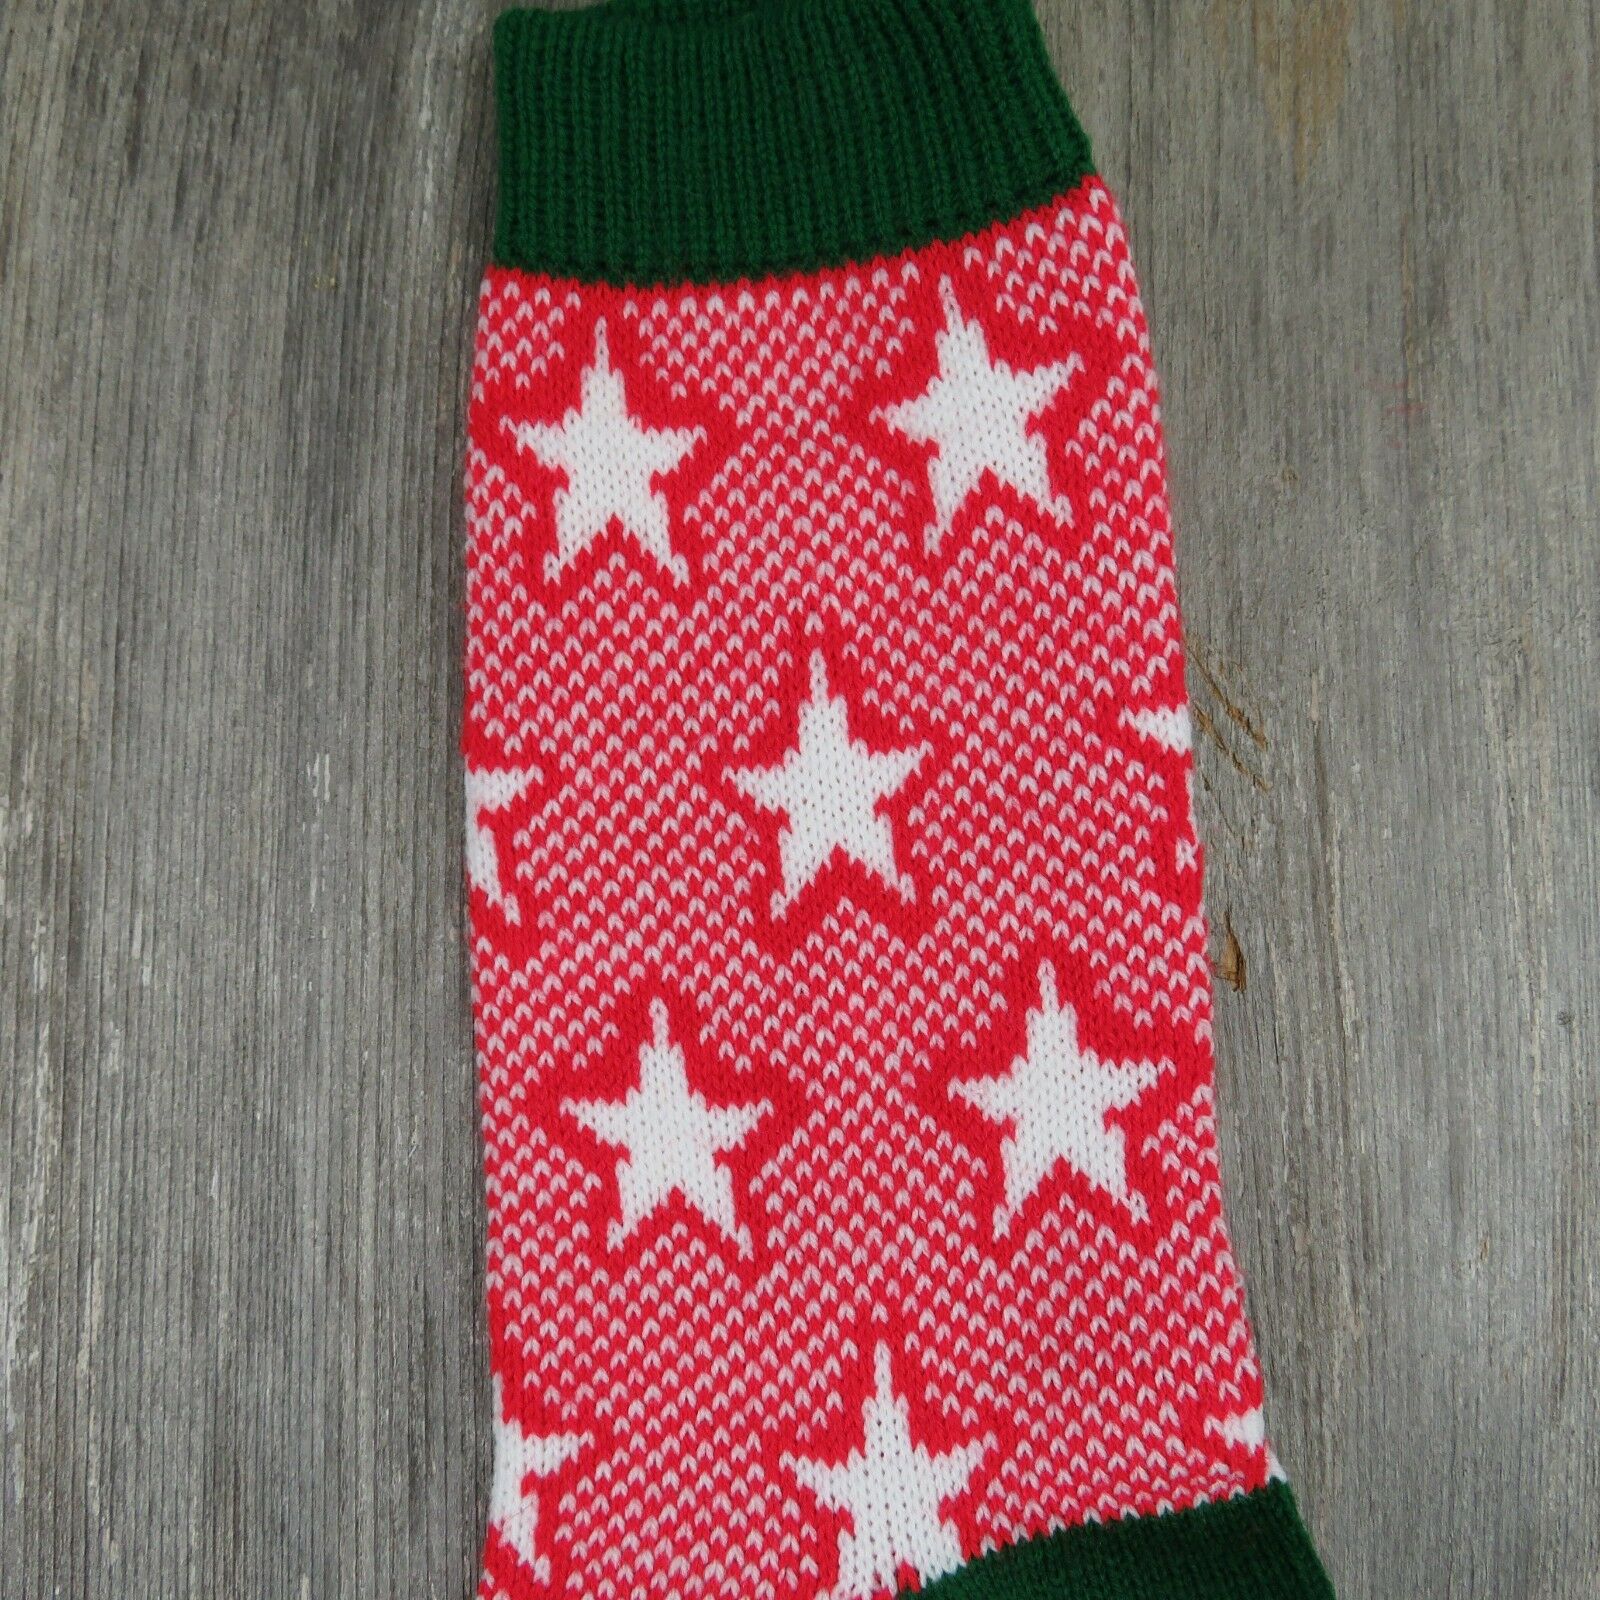 Vintage Christmas Stocking Stars Knitted Knit Green Red White Large ST36 - At Grandma's Table